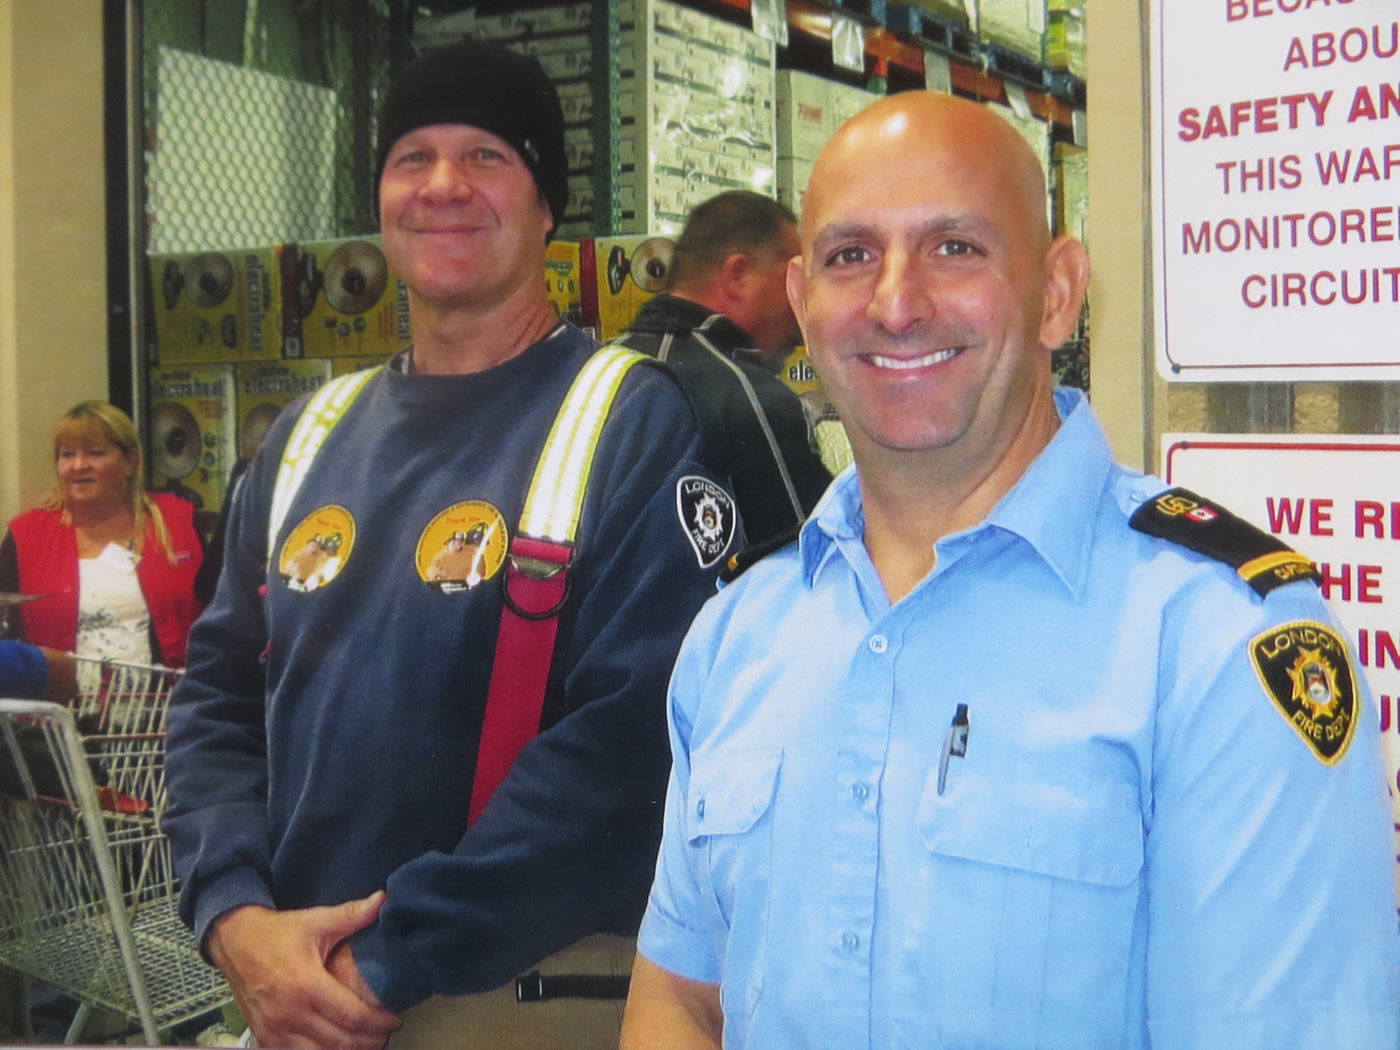 Two fire fighters taking a moment to pose for a photo at the annual MD Boot Toll